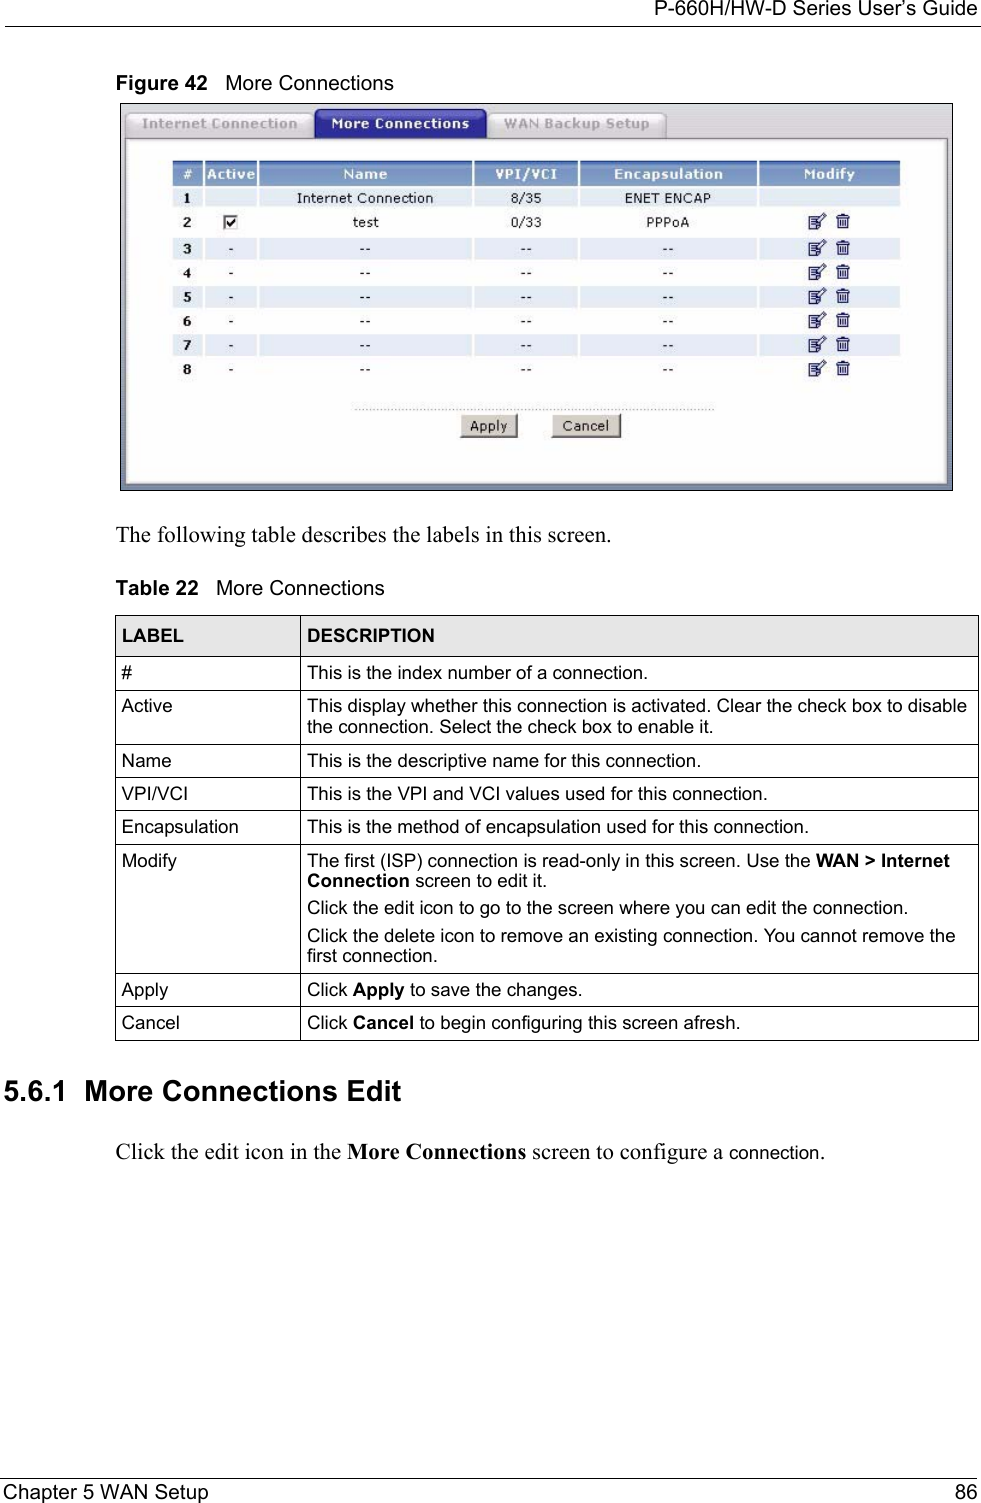 P-660H/HW-D Series User’s GuideChapter 5 WAN Setup 86Figure 42   More ConnectionsThe following table describes the labels in this screen.5.6.1  More Connections Edit Click the edit icon in the More Connections screen to configure a connection.Table 22   More ConnectionsLABEL DESCRIPTION# This is the index number of a connection.Active This display whether this connection is activated. Clear the check box to disable the connection. Select the check box to enable it.Name This is the descriptive name for this connection.VPI/VCI This is the VPI and VCI values used for this connection.Encapsulation This is the method of encapsulation used for this connection.Modify The first (ISP) connection is read-only in this screen. Use the WAN &gt; Internet Connection screen to edit it.Click the edit icon to go to the screen where you can edit the connection.Click the delete icon to remove an existing connection. You cannot remove the first connection.Apply Click Apply to save the changes. Cancel Click Cancel to begin configuring this screen afresh.